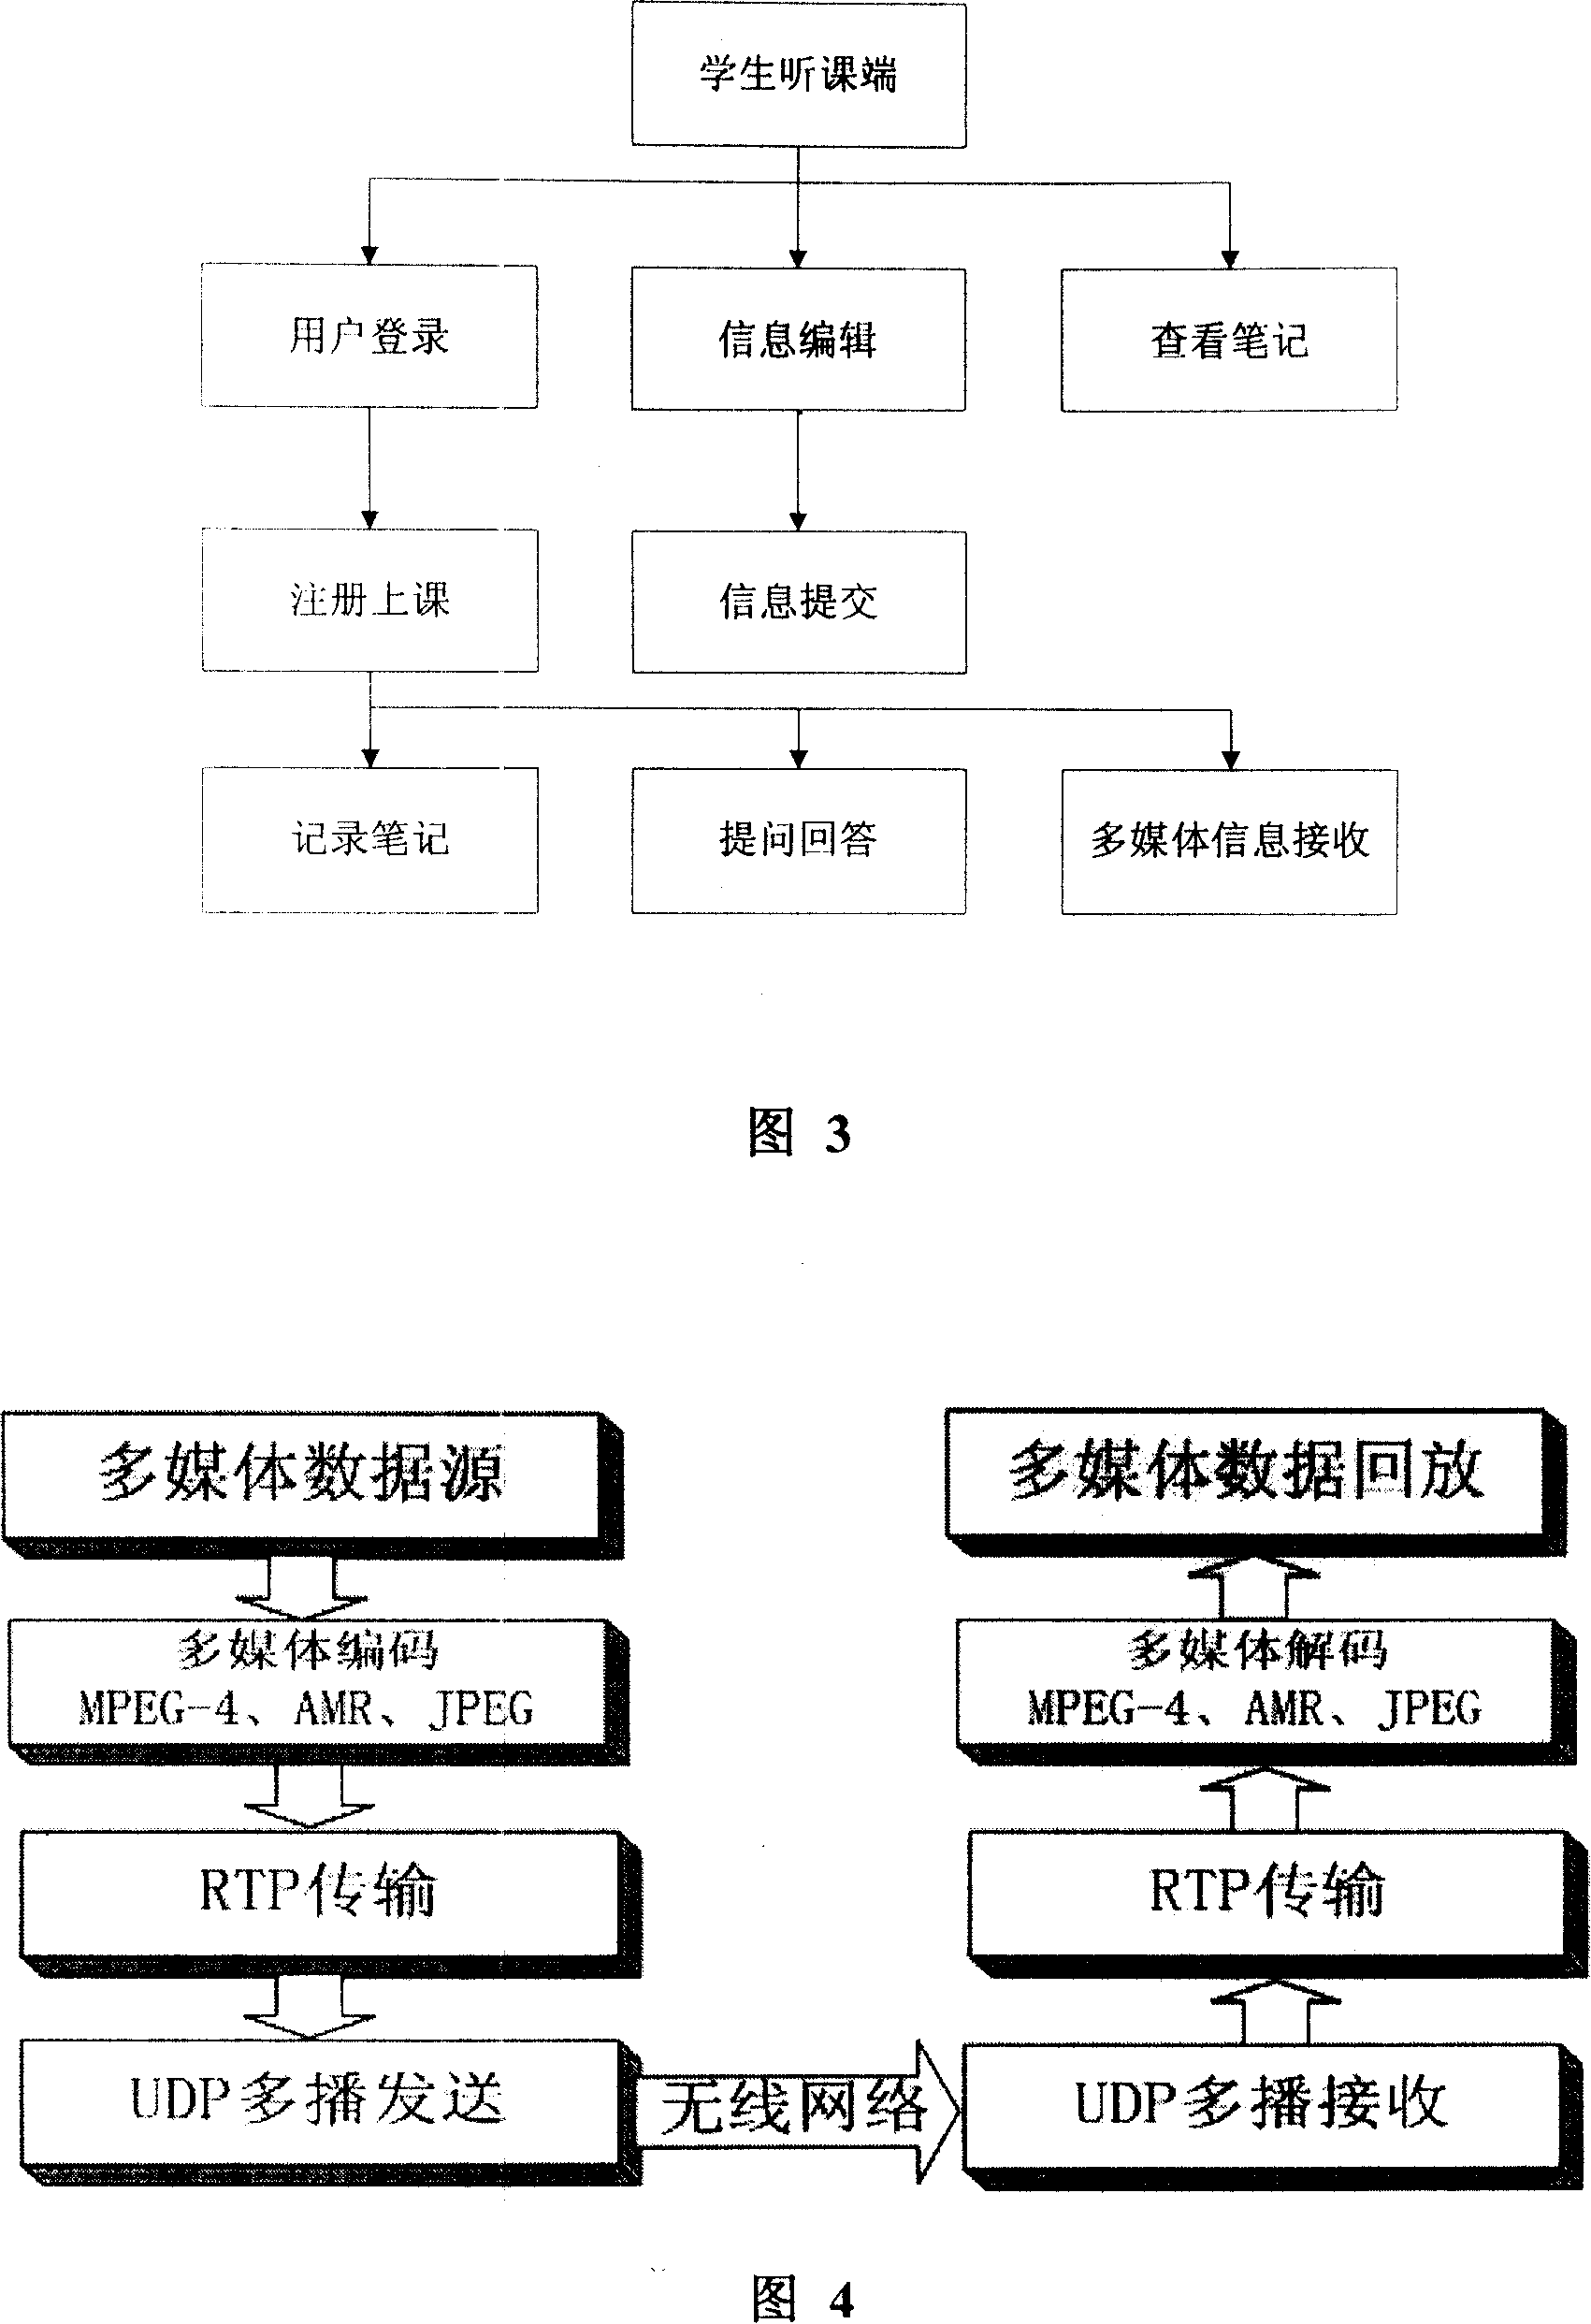 Wireless multimedia real-time learning system and method